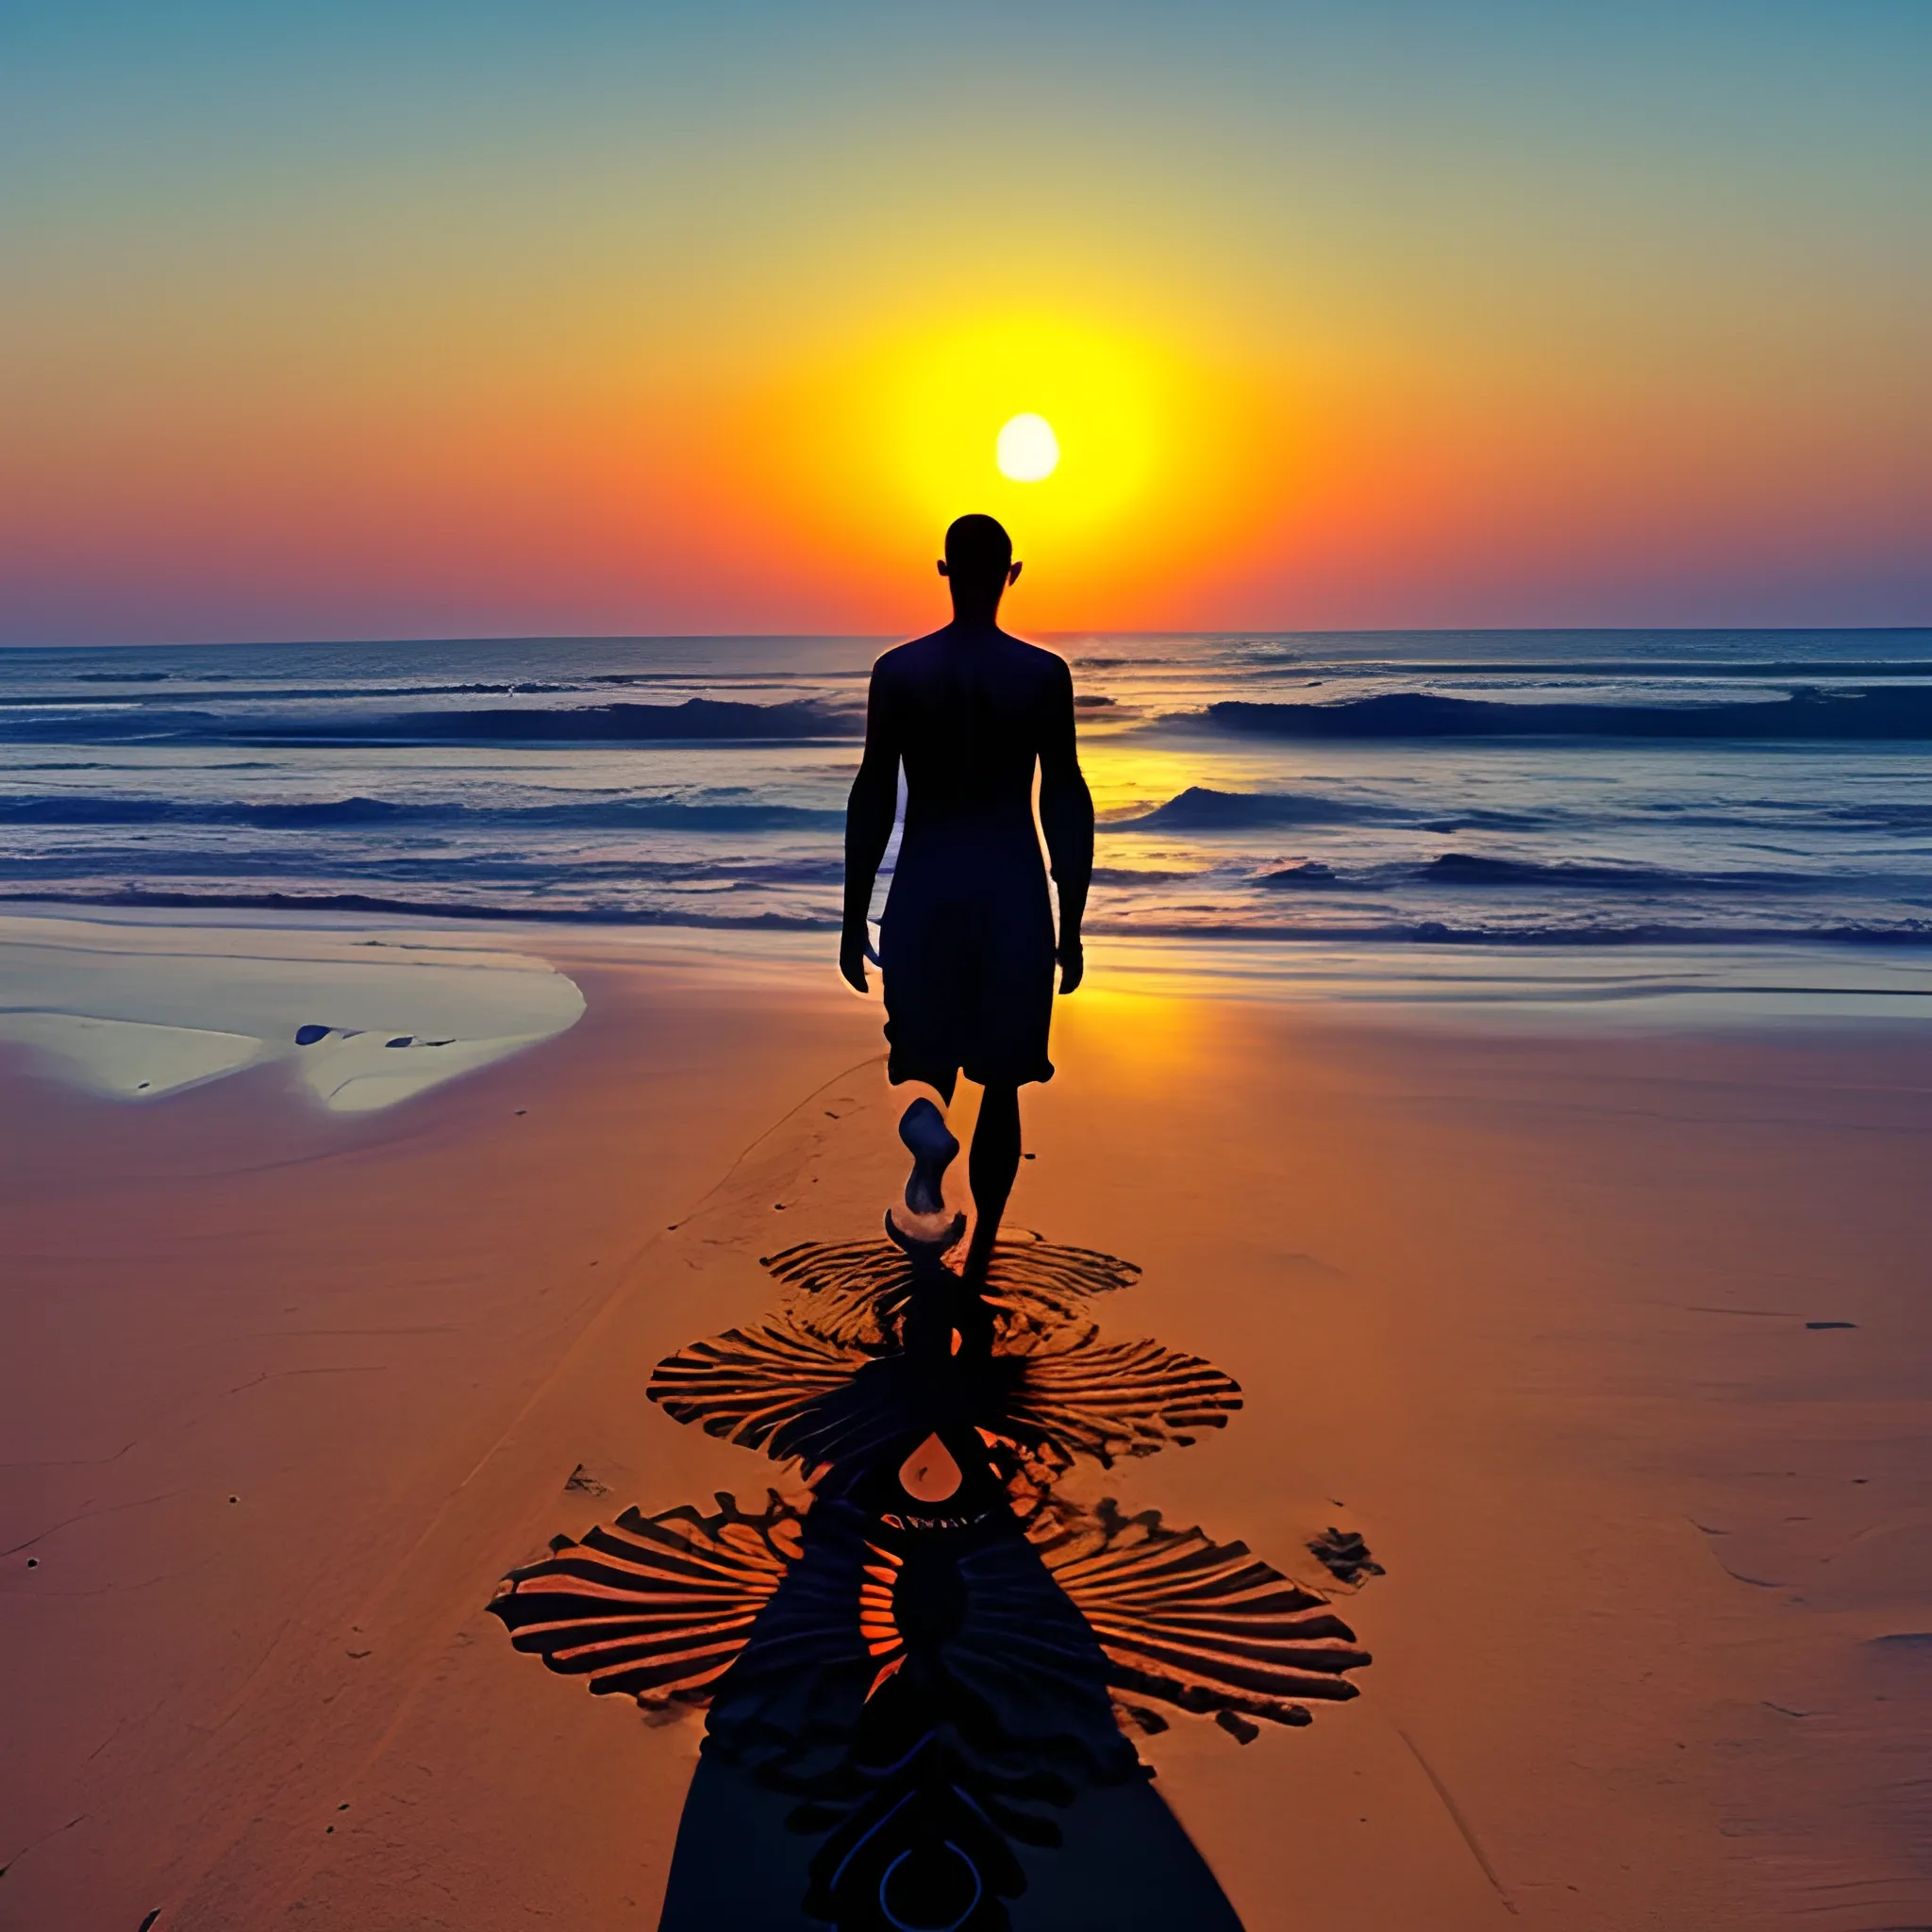 man with the seven chakras on his back, beach, sunset, universe, moon, caduceus, walking to the sea, initiation, footprints in the sand,


